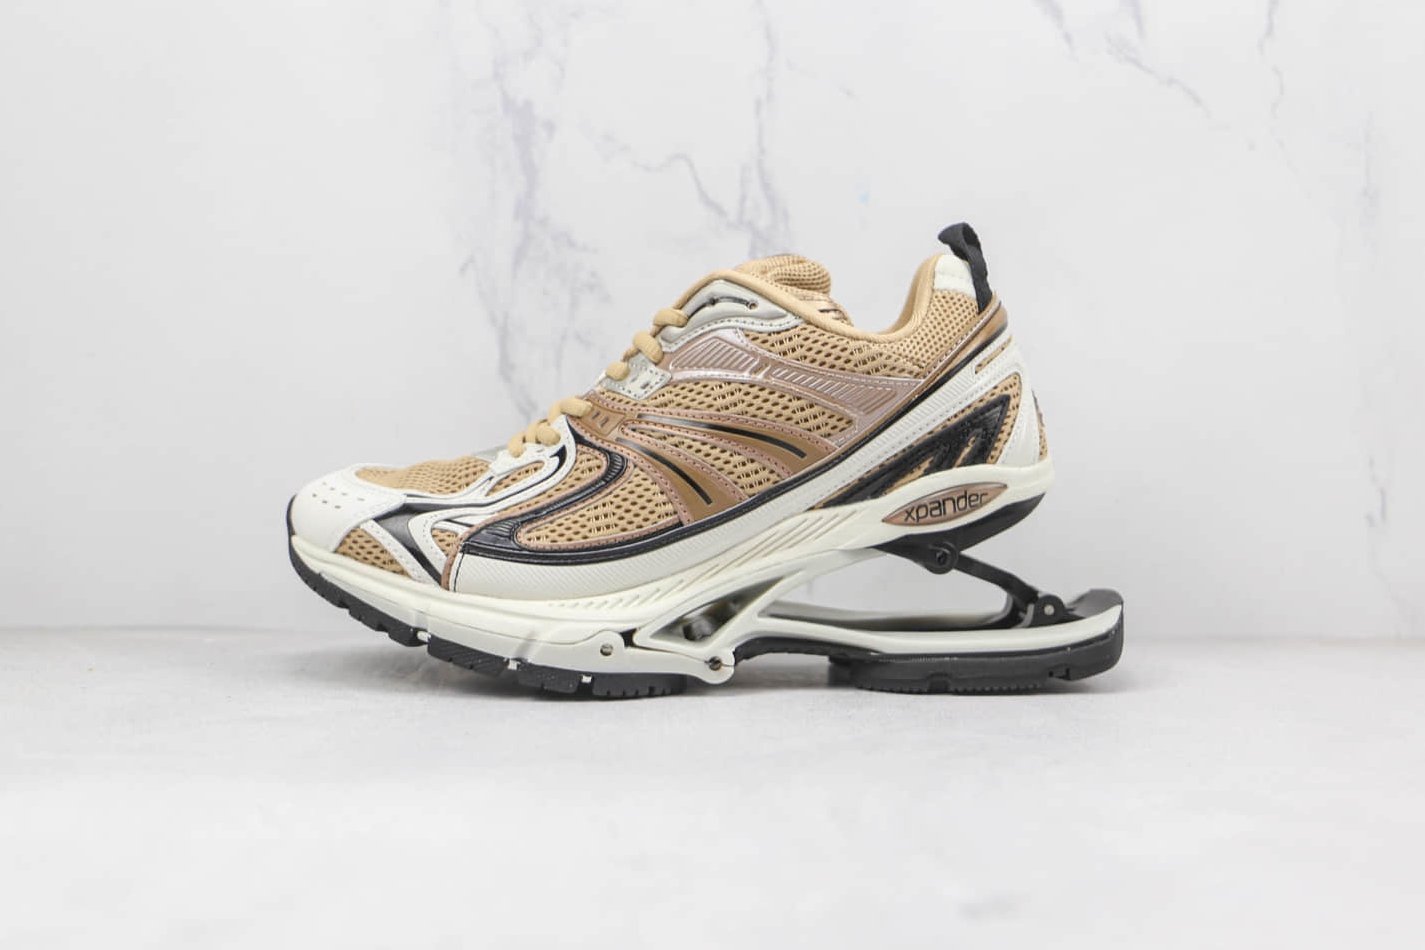 Balenciaga X-Pander Sneakers in Yellow - Stand Out in Style